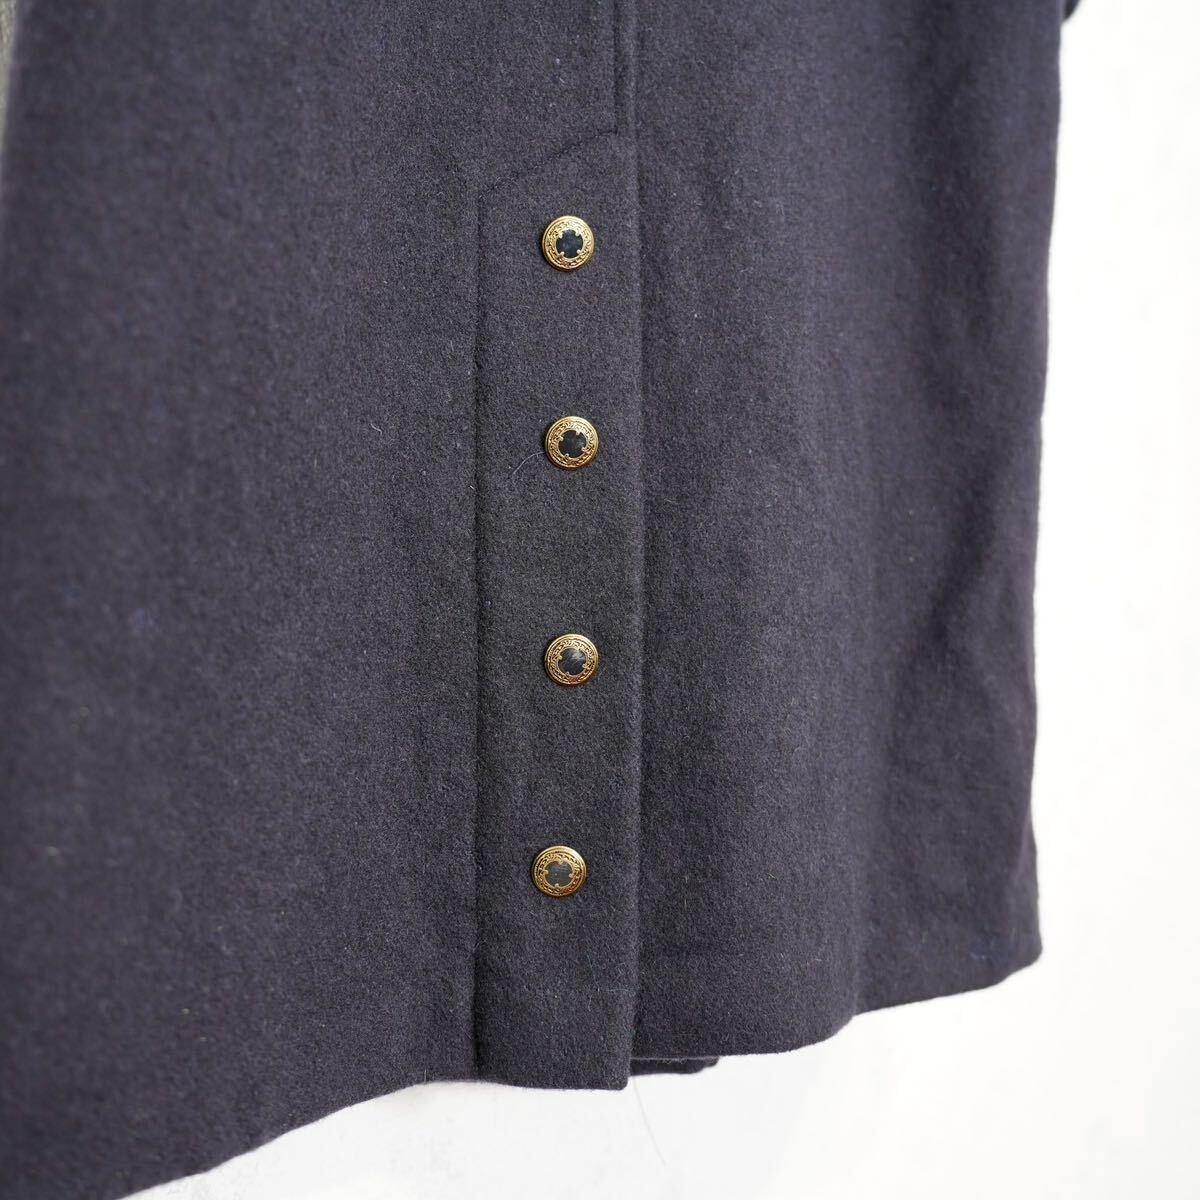 USA VINTAGE LES MODES NAVY COLOR DESIGN BUTTON WOOL CHESTERFIELD COAT/アメリカ古着ネイビーカラーデザインボタンチェスターコート_画像9